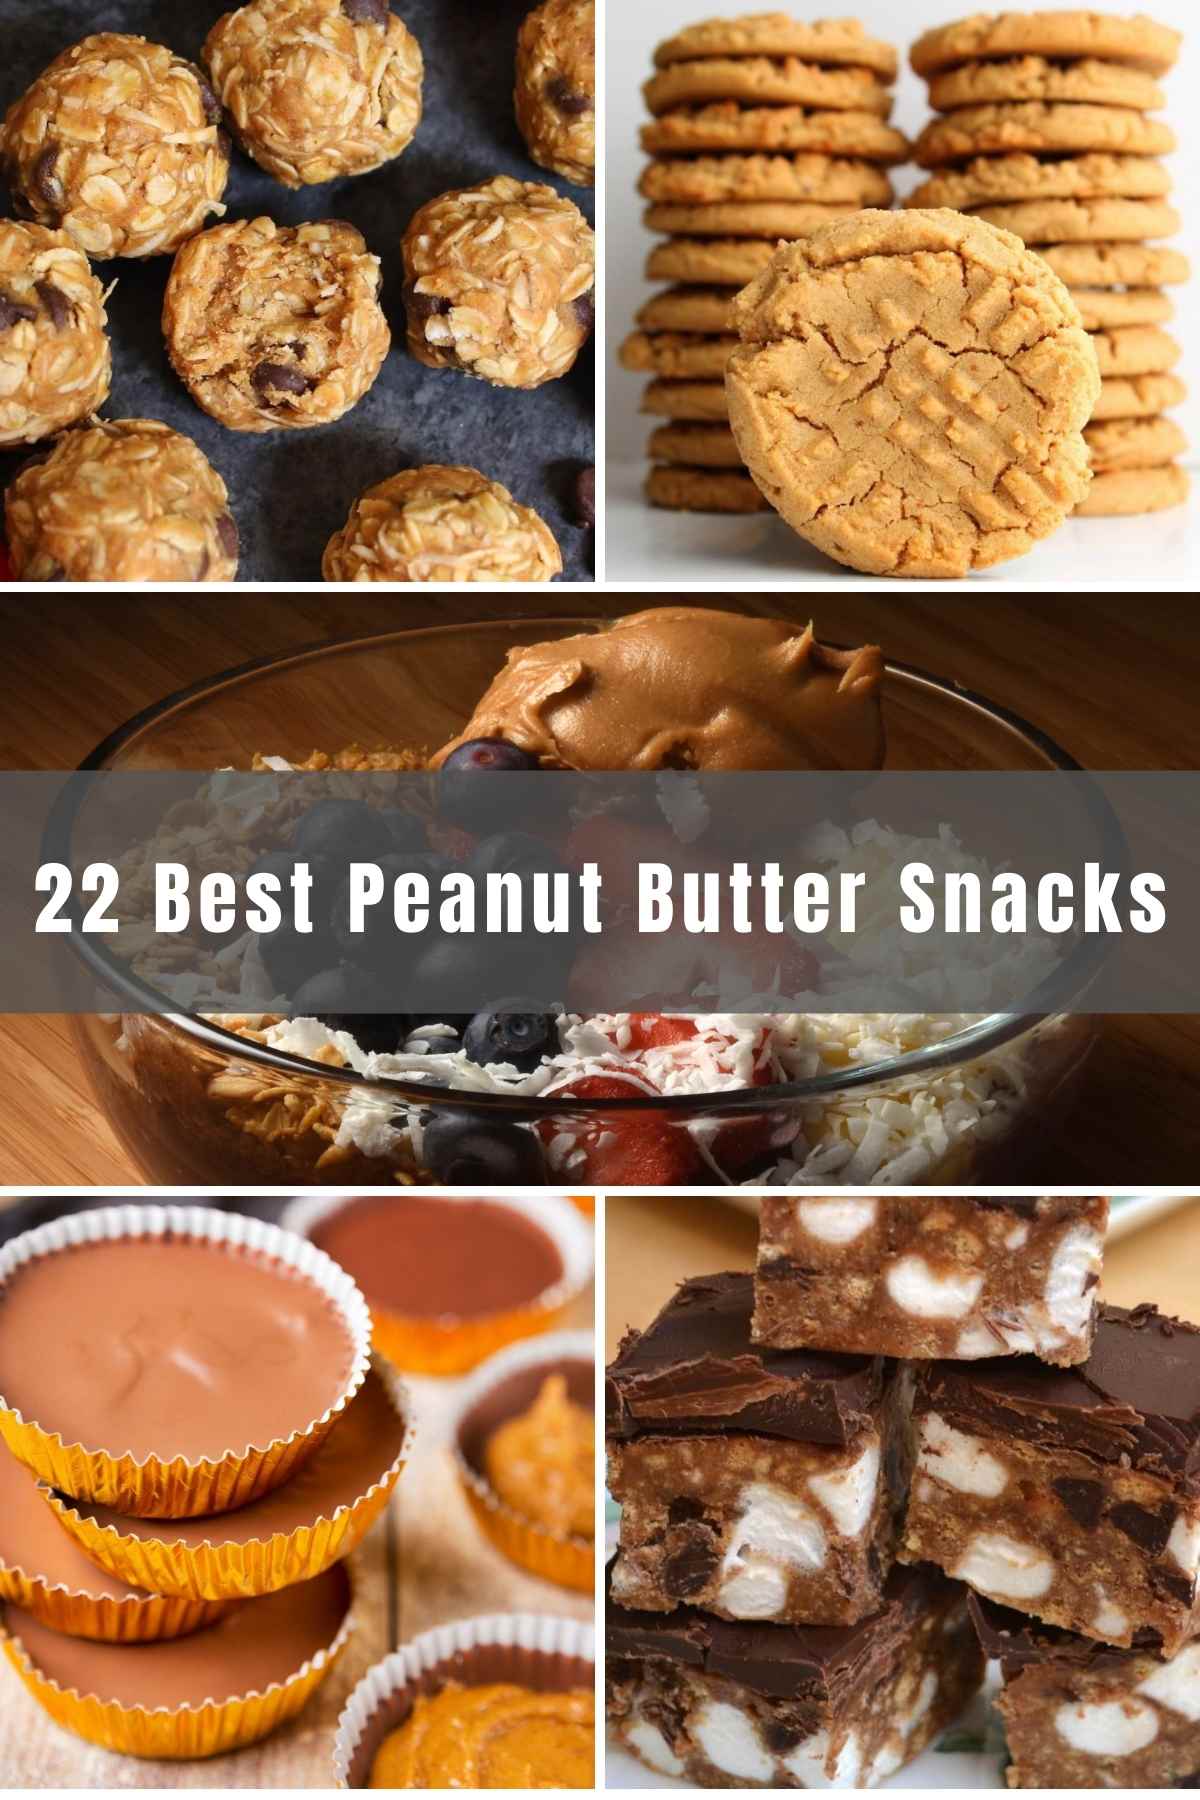 While it’s often paired with jam or jelly, peanut butter is a versatile ingredient that’s great for baking too. Here we’ve rounded up the 22 of the Best Peanut Butter Snacks that will delight your taste buds. For healthy, easy, vegan and keto-friendly peanut butter snacks - this article has got you covered!